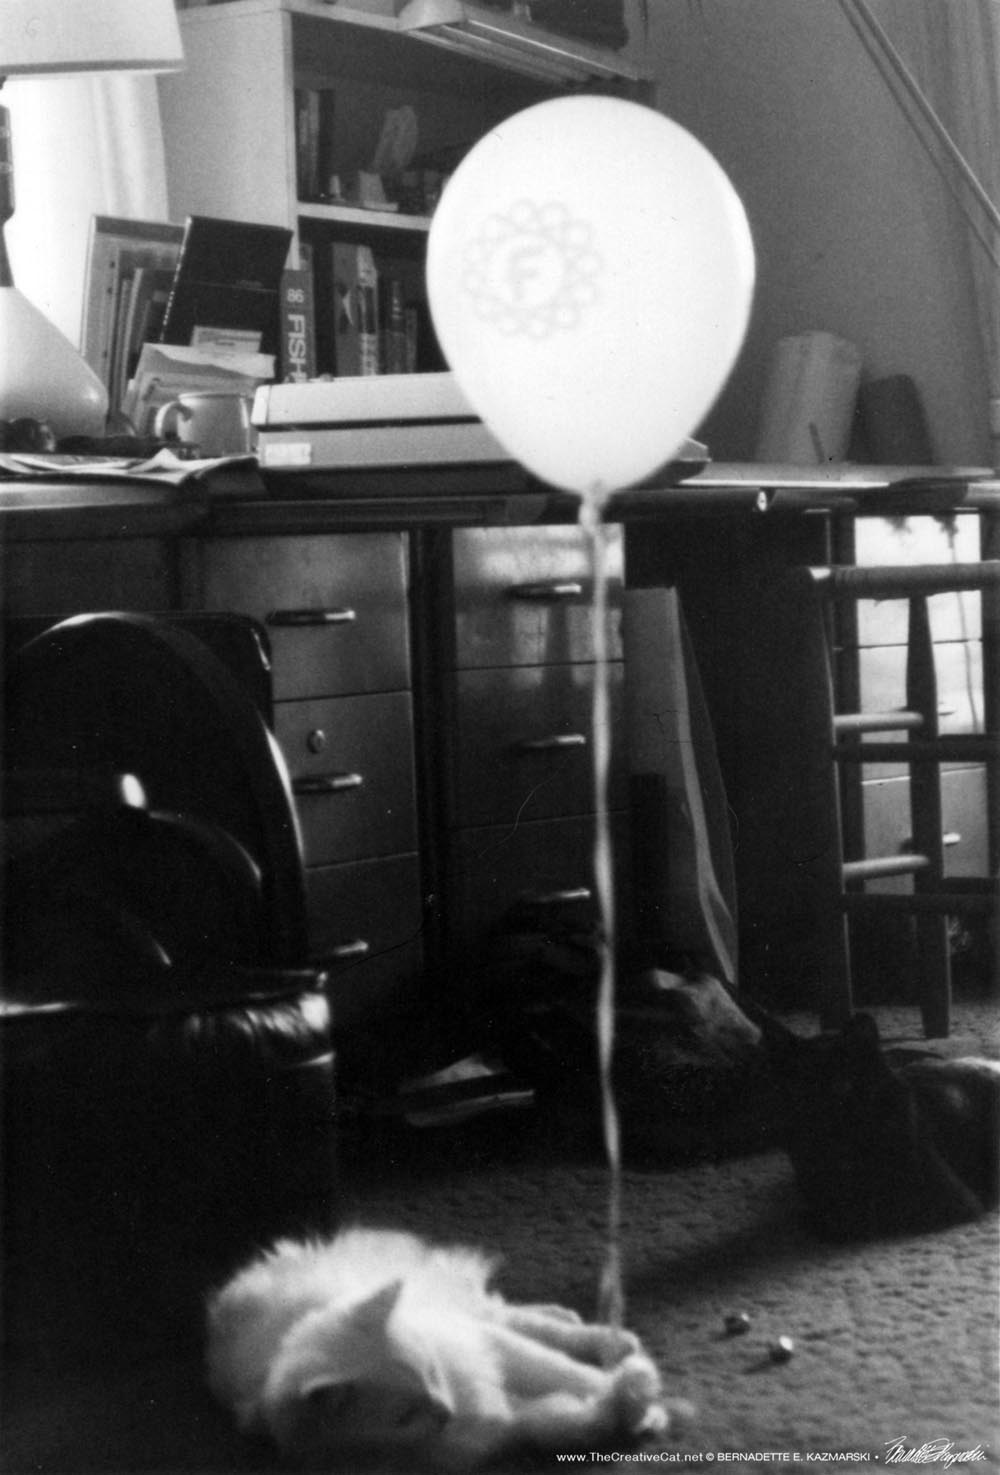 two cats and balloon in black and white